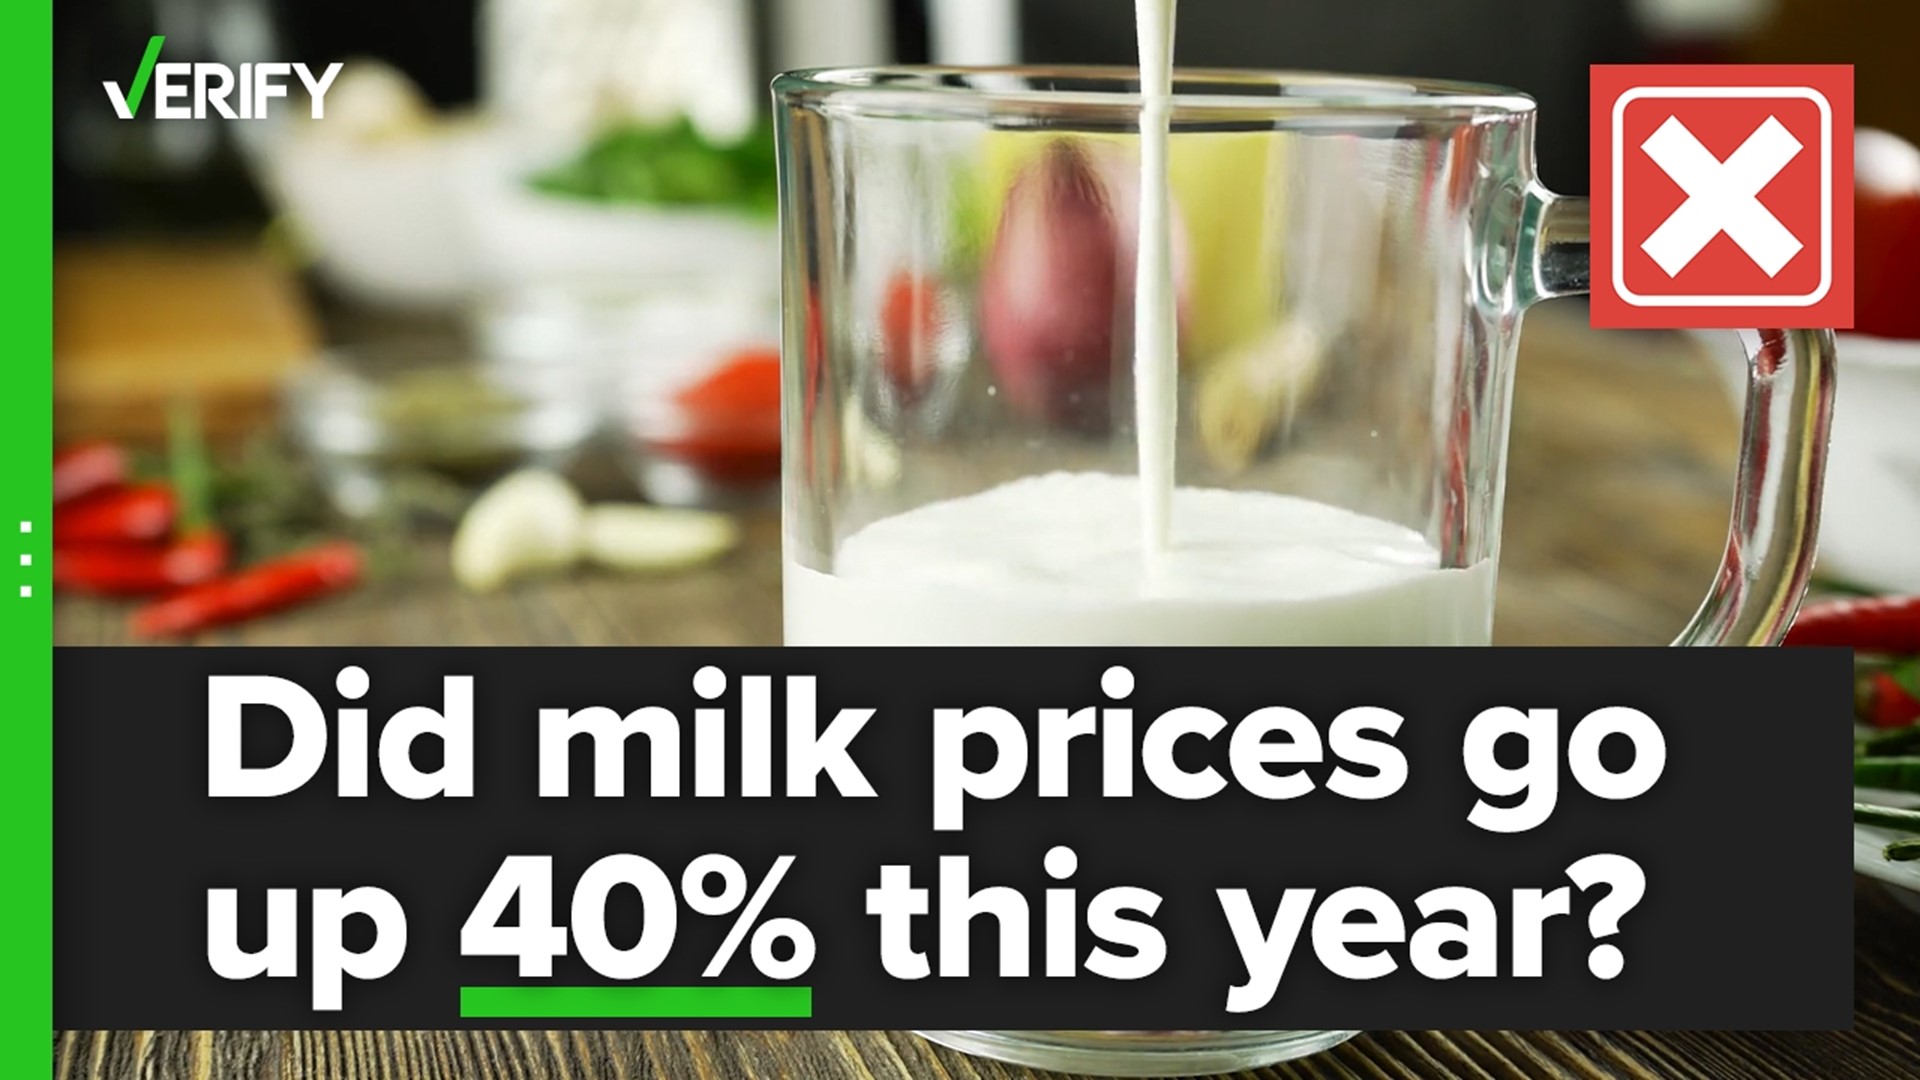 Has the price of a gallon of milk gone up 40% this year? Sources from the Center for Dairy Excellence and the Bureau of Labor Statistic that prove this is false.